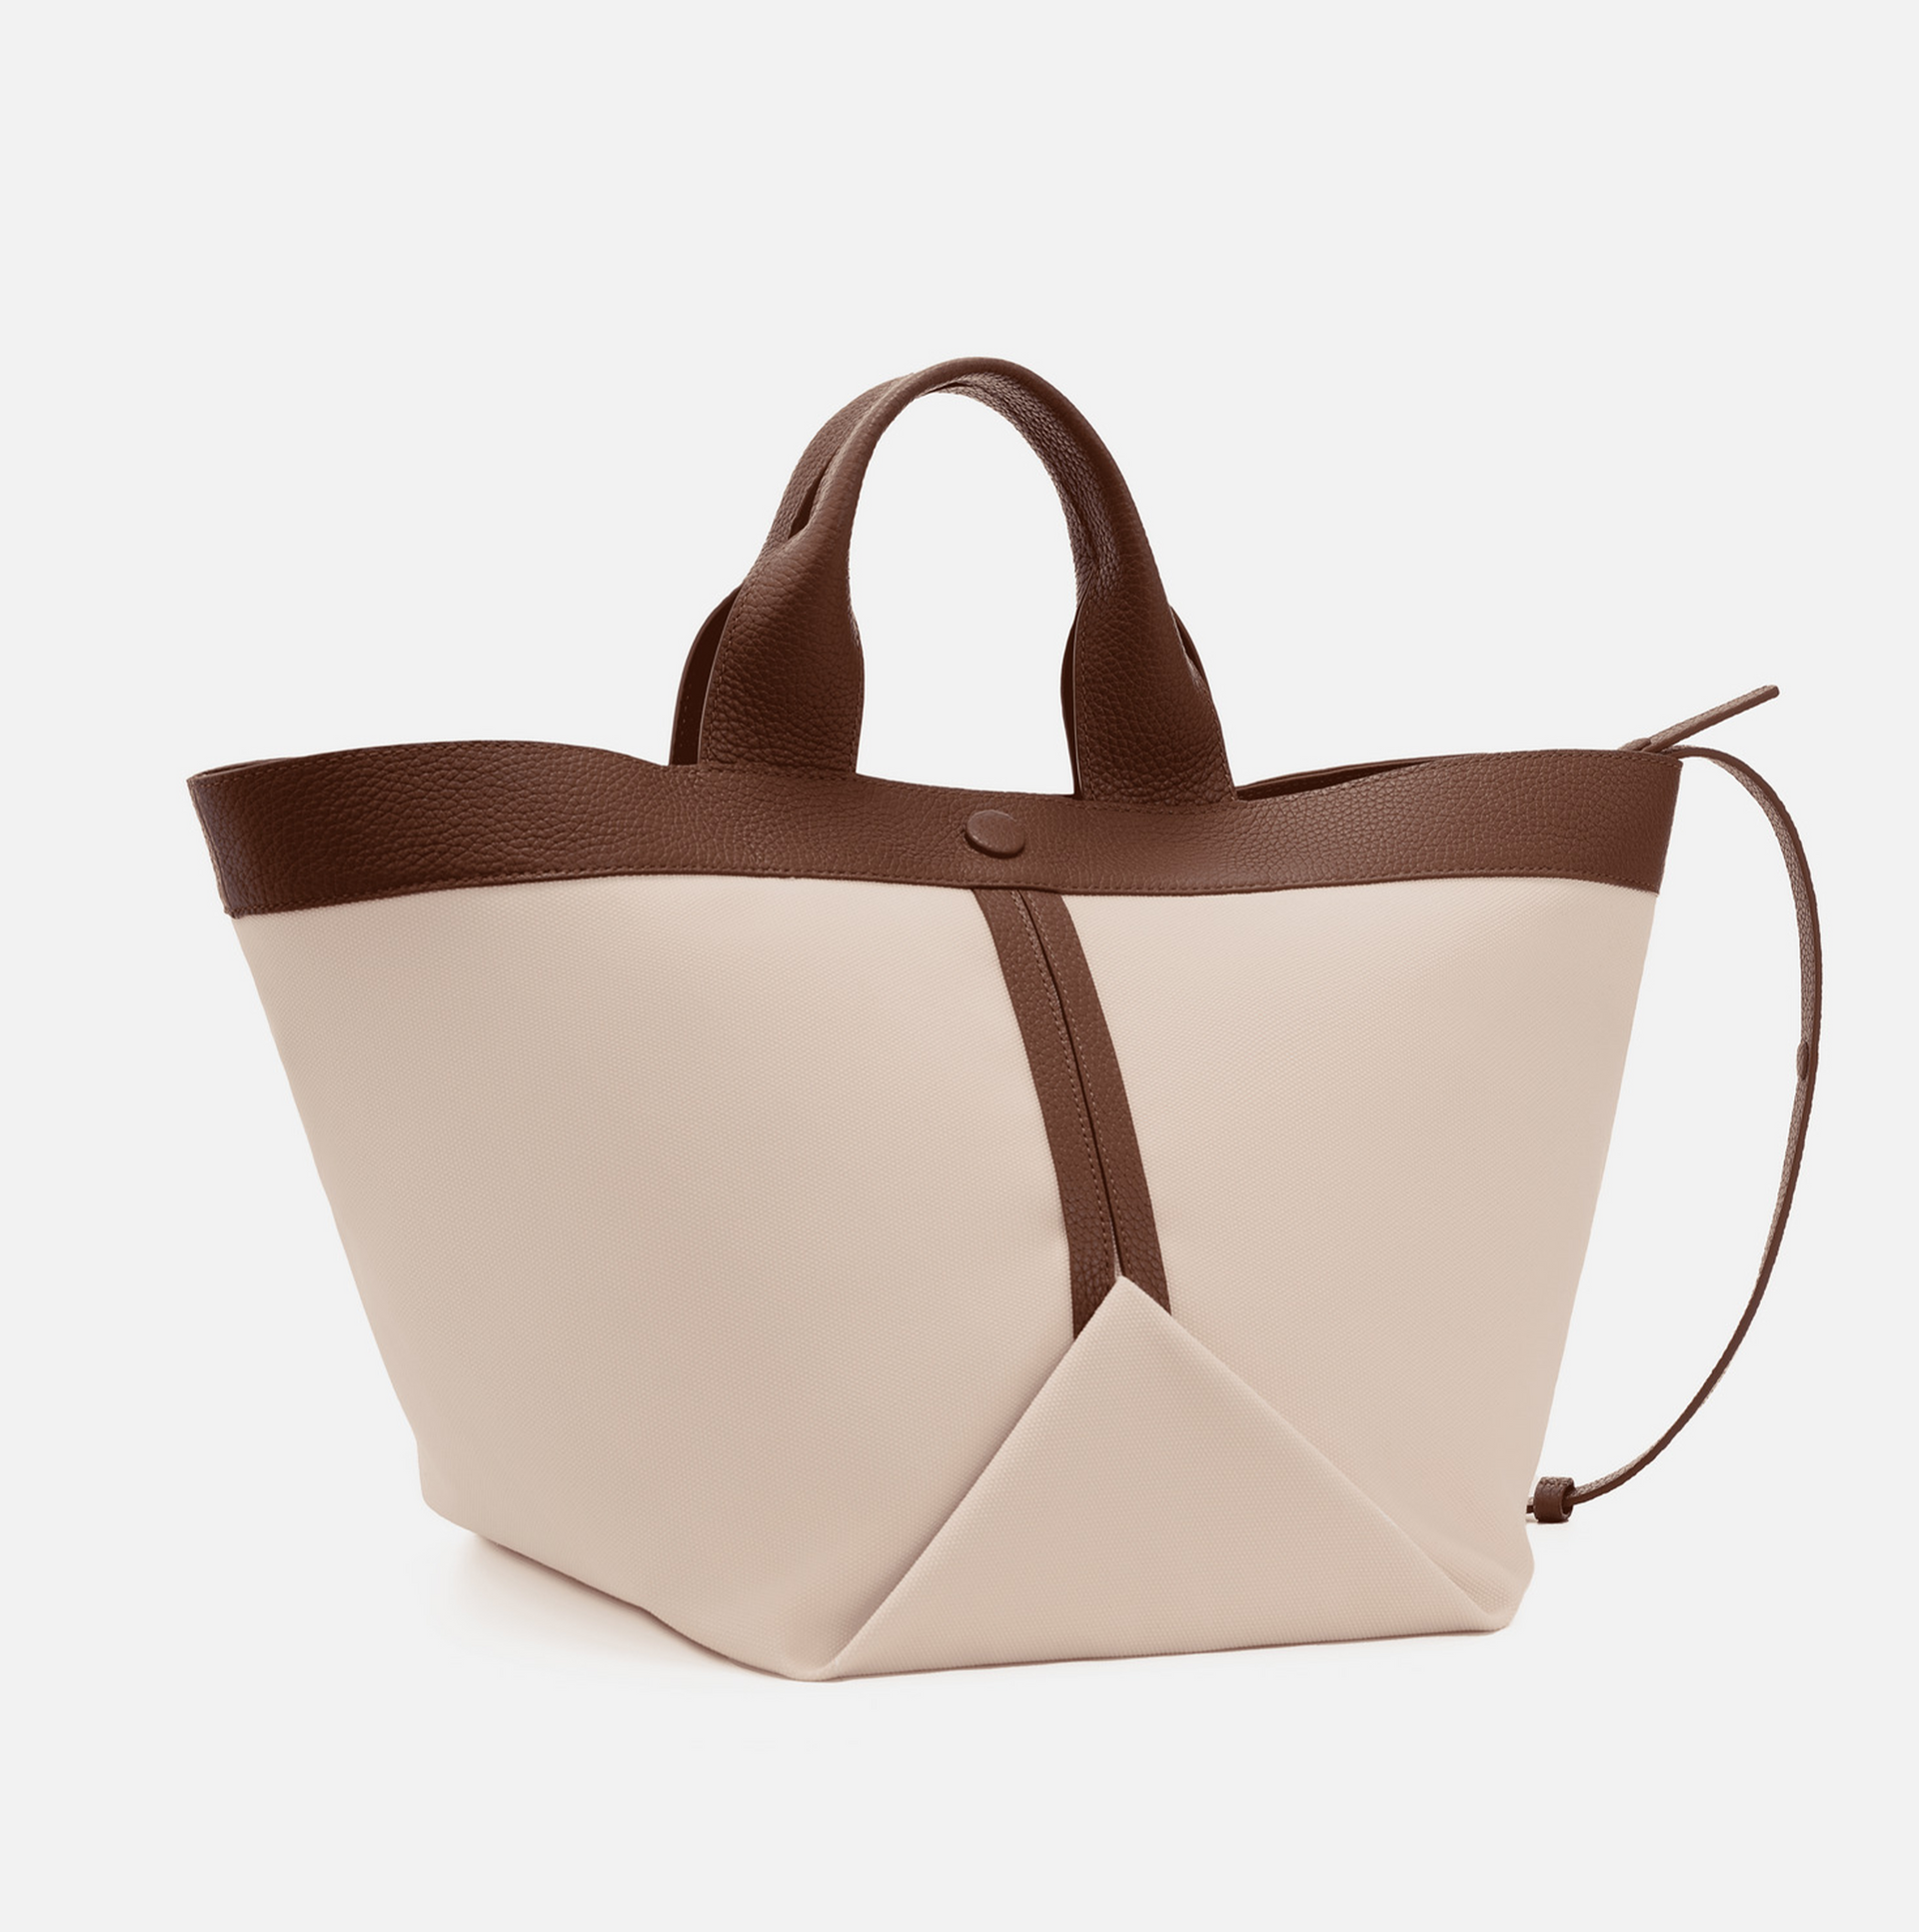 Women's Tote Bags, Large, Canvas & Leather Tote Bags